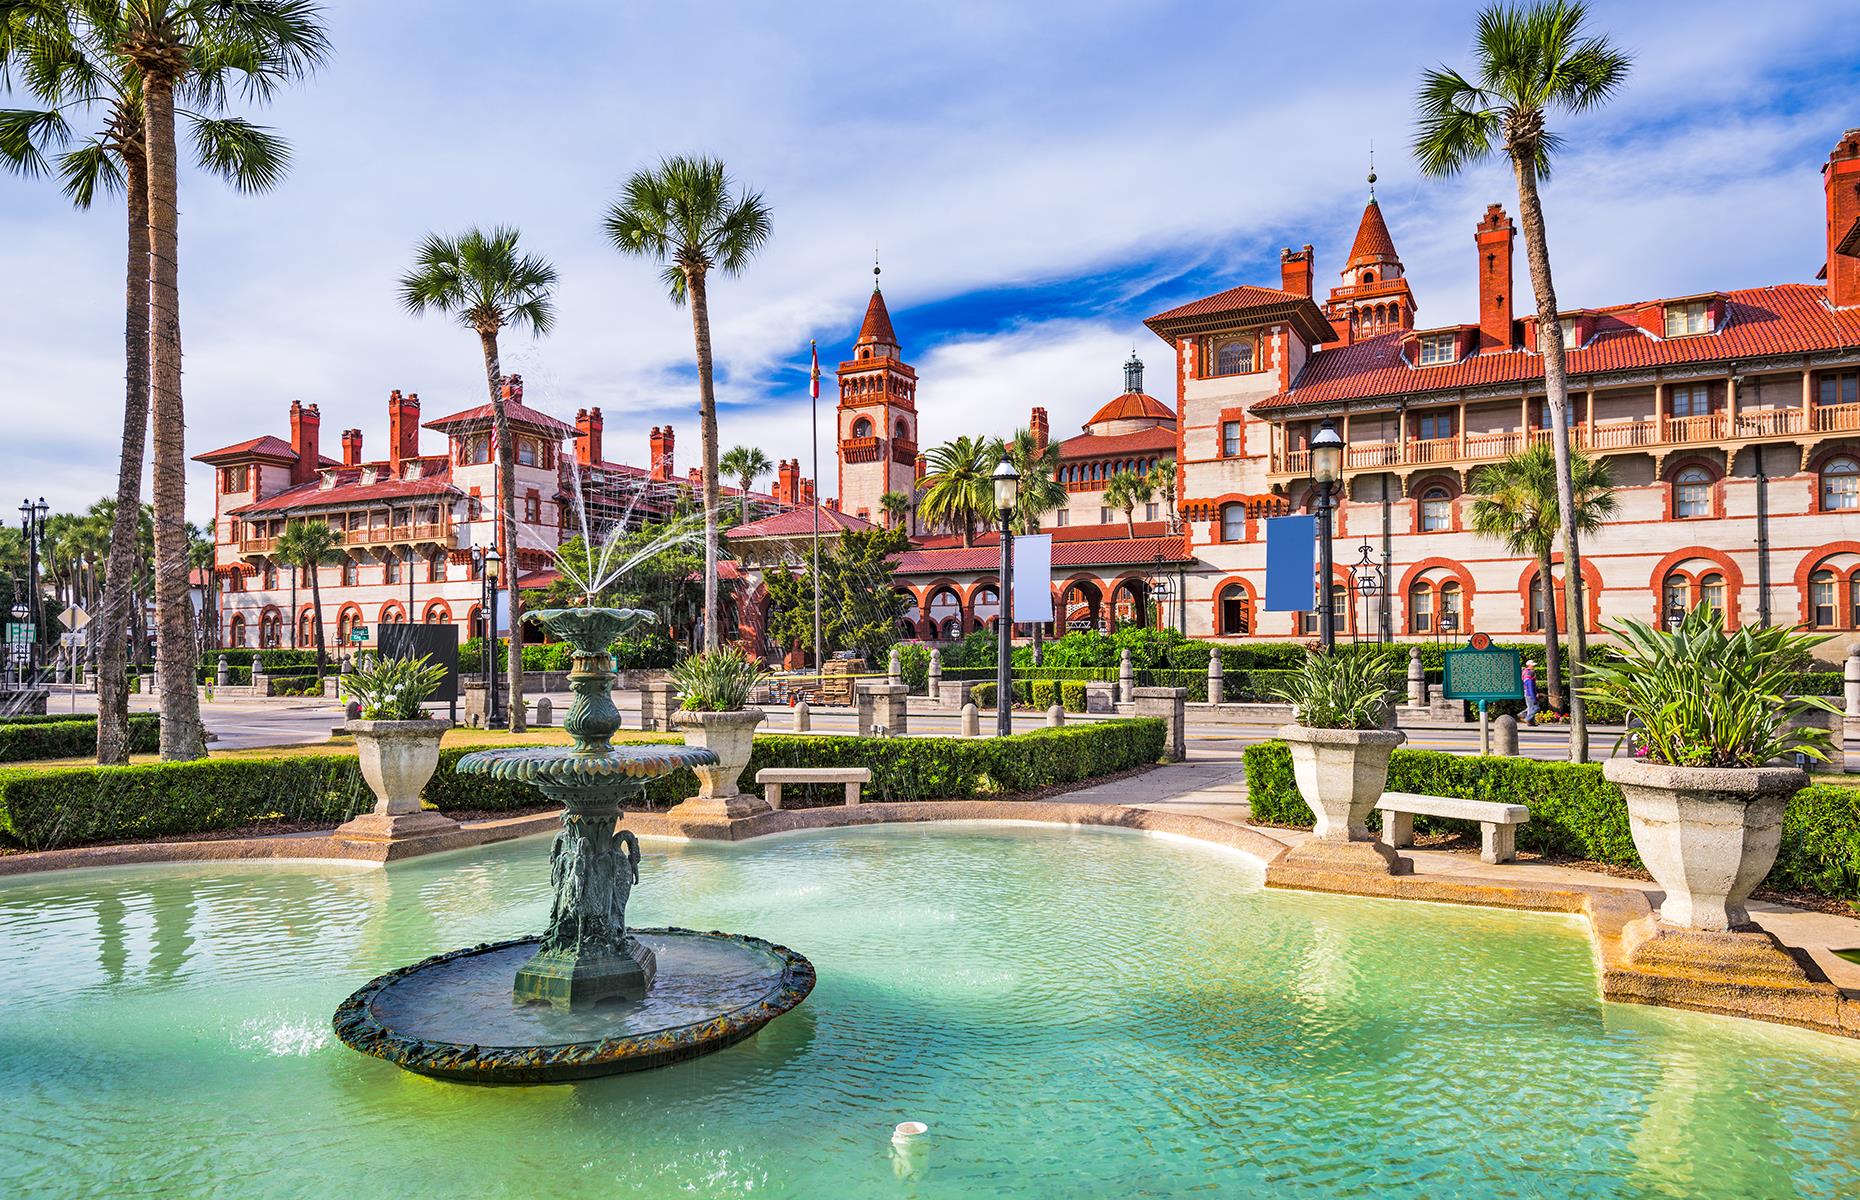 <p>Florida is not all theme parks and beaches, it's also home to the oldest continuously inhabited European settlement in the continental United States. St Augustine was established in 1565 by Spanish explorers and many of its buildings in the Historic District still date back to the 1700s. The <a href="https://staugustinehistorictours.com/">historic walking tours</a> in St Augustine have continuously been voted among the best in the country. Choose between the Conquistatour of St Augustine or the Homes and Buildings Tour and journey into the past of this historic city. Tours run daily and tickets are $25 (discounts for children).</p>